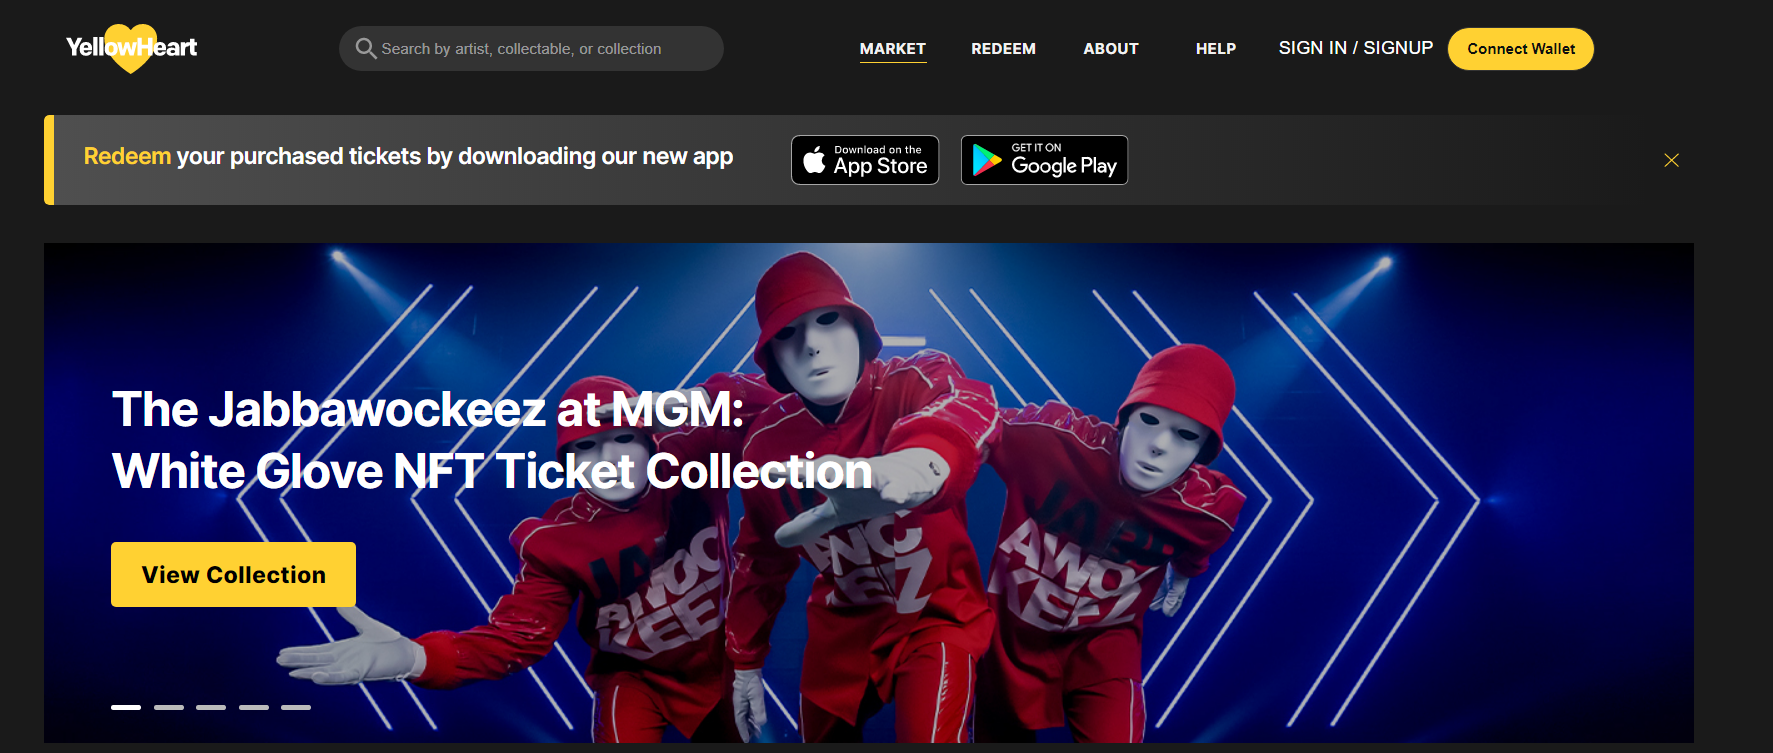 YellowHeart Partnered With MGM Grand Resorts To Sell NFT Tickets For Jabbawockeez Dance Shows